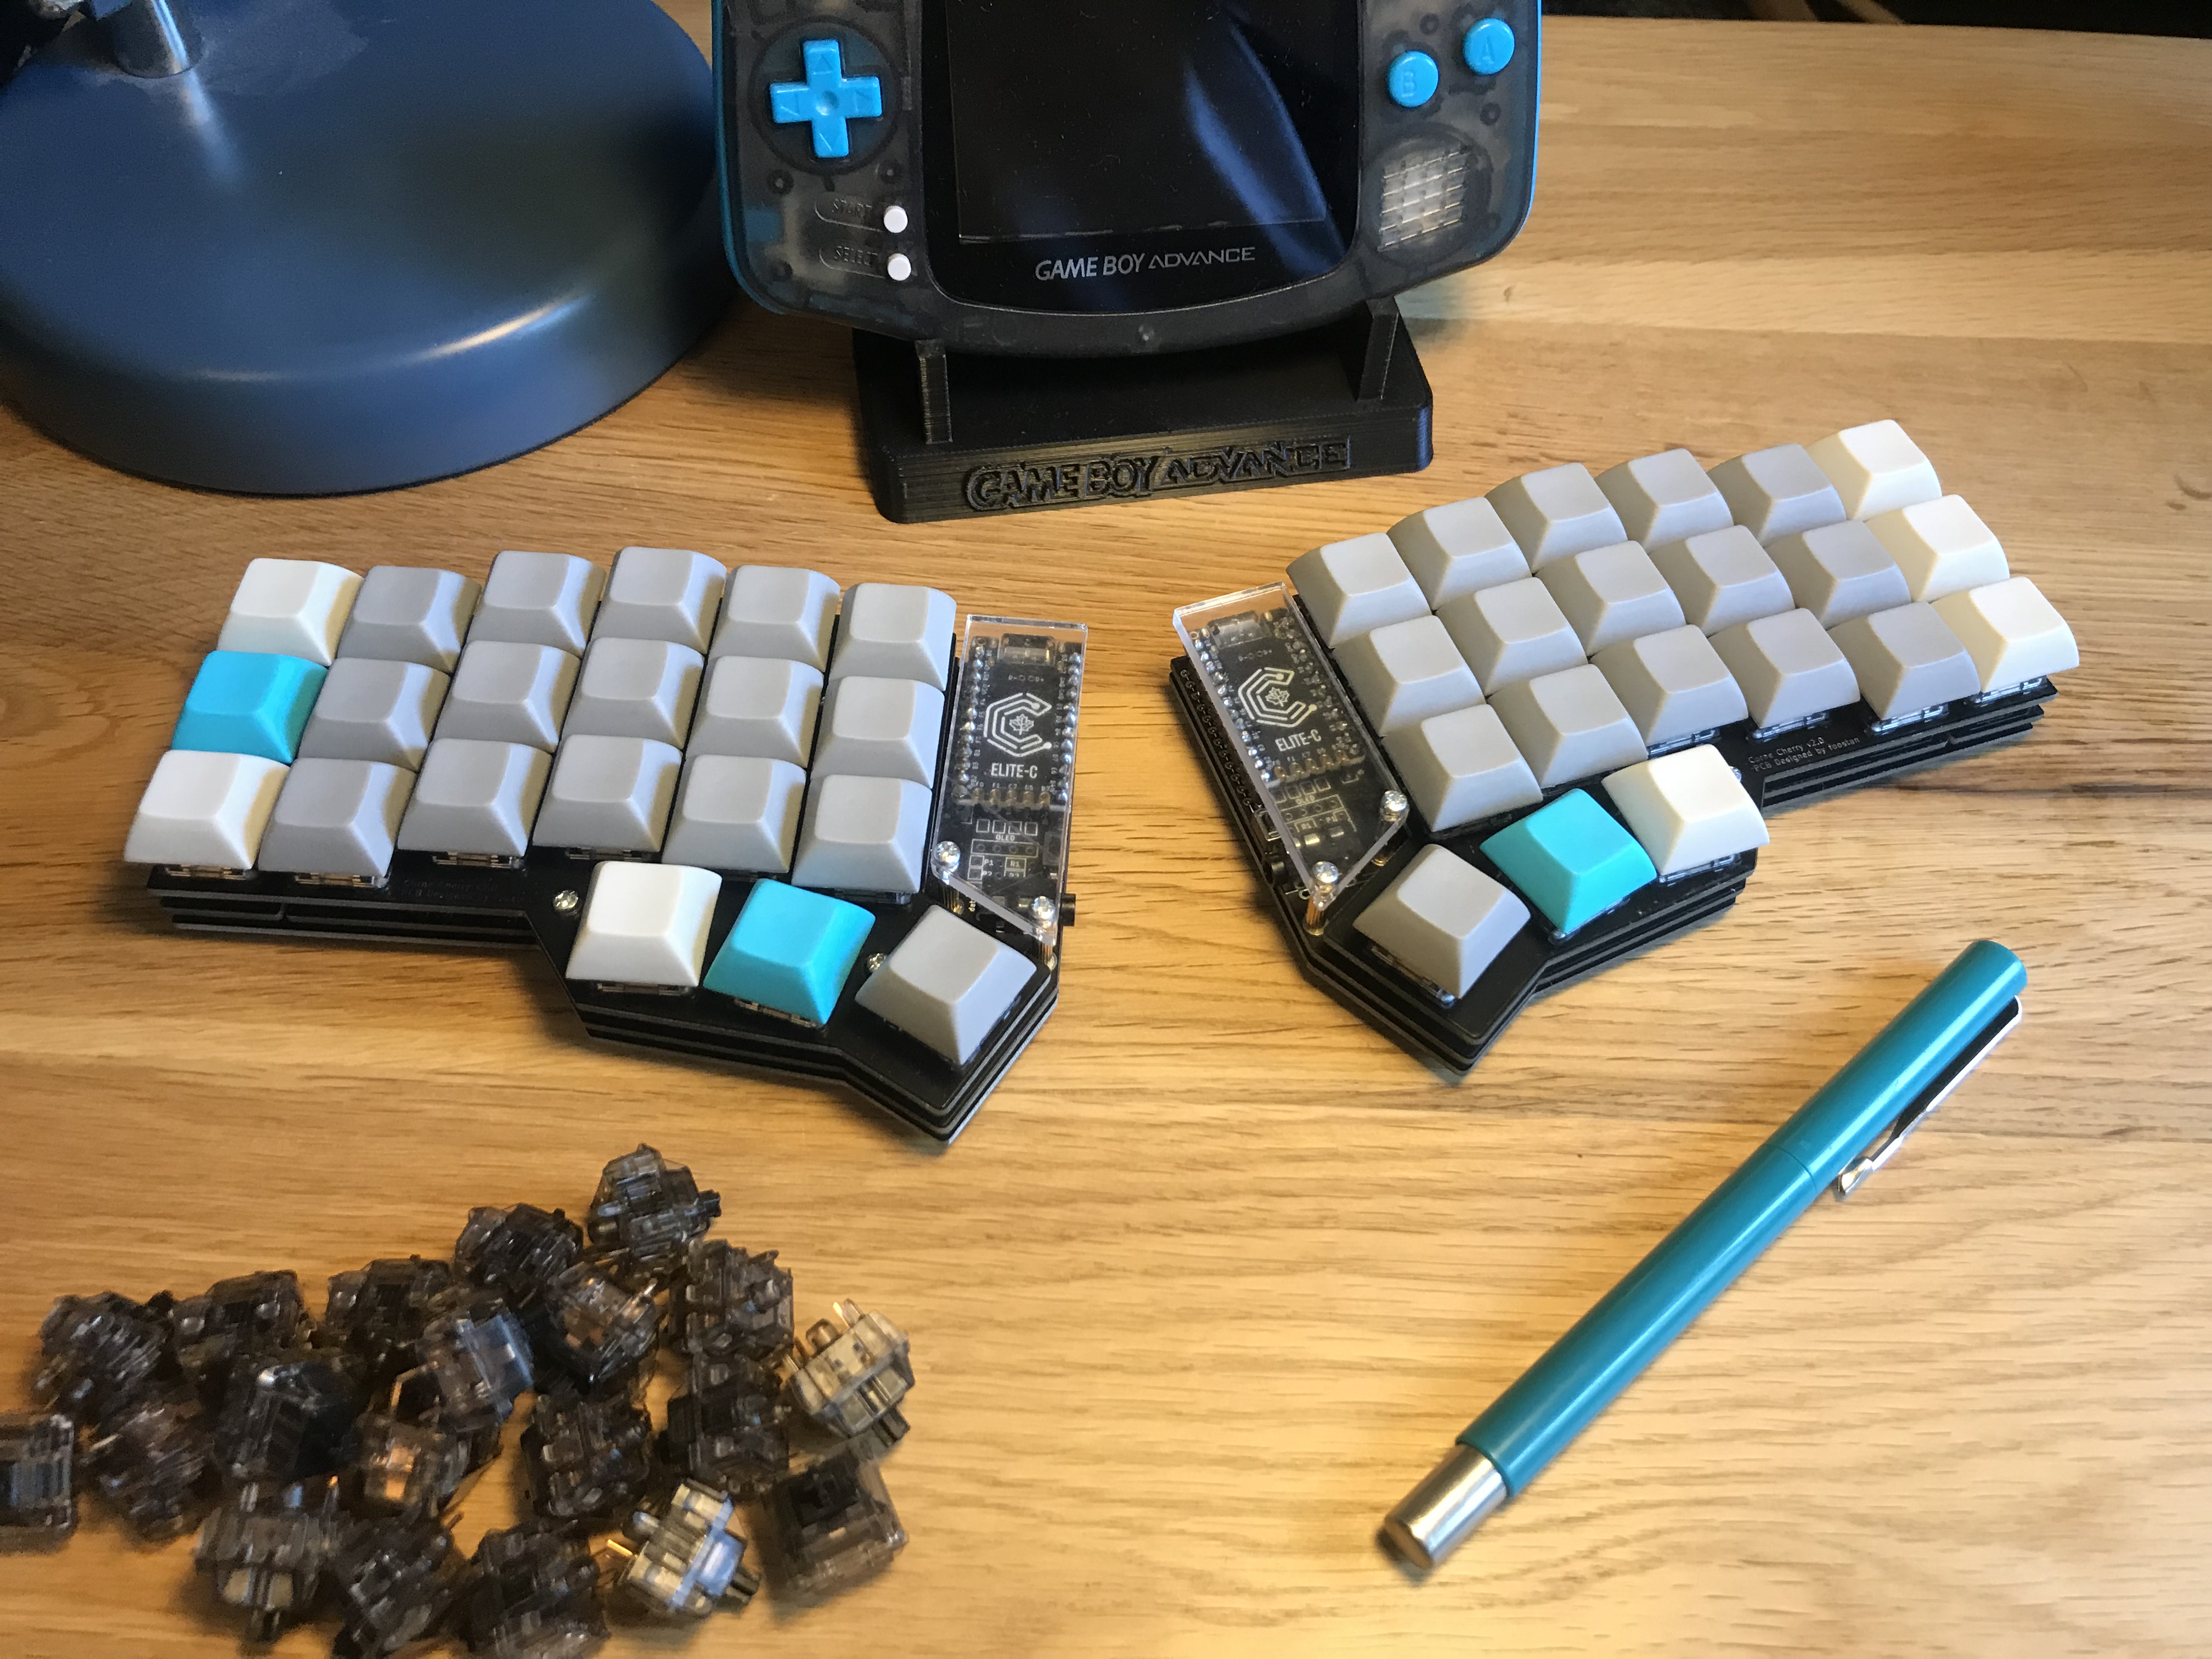 Unplugged CRKBD surrounded by colour-matching items